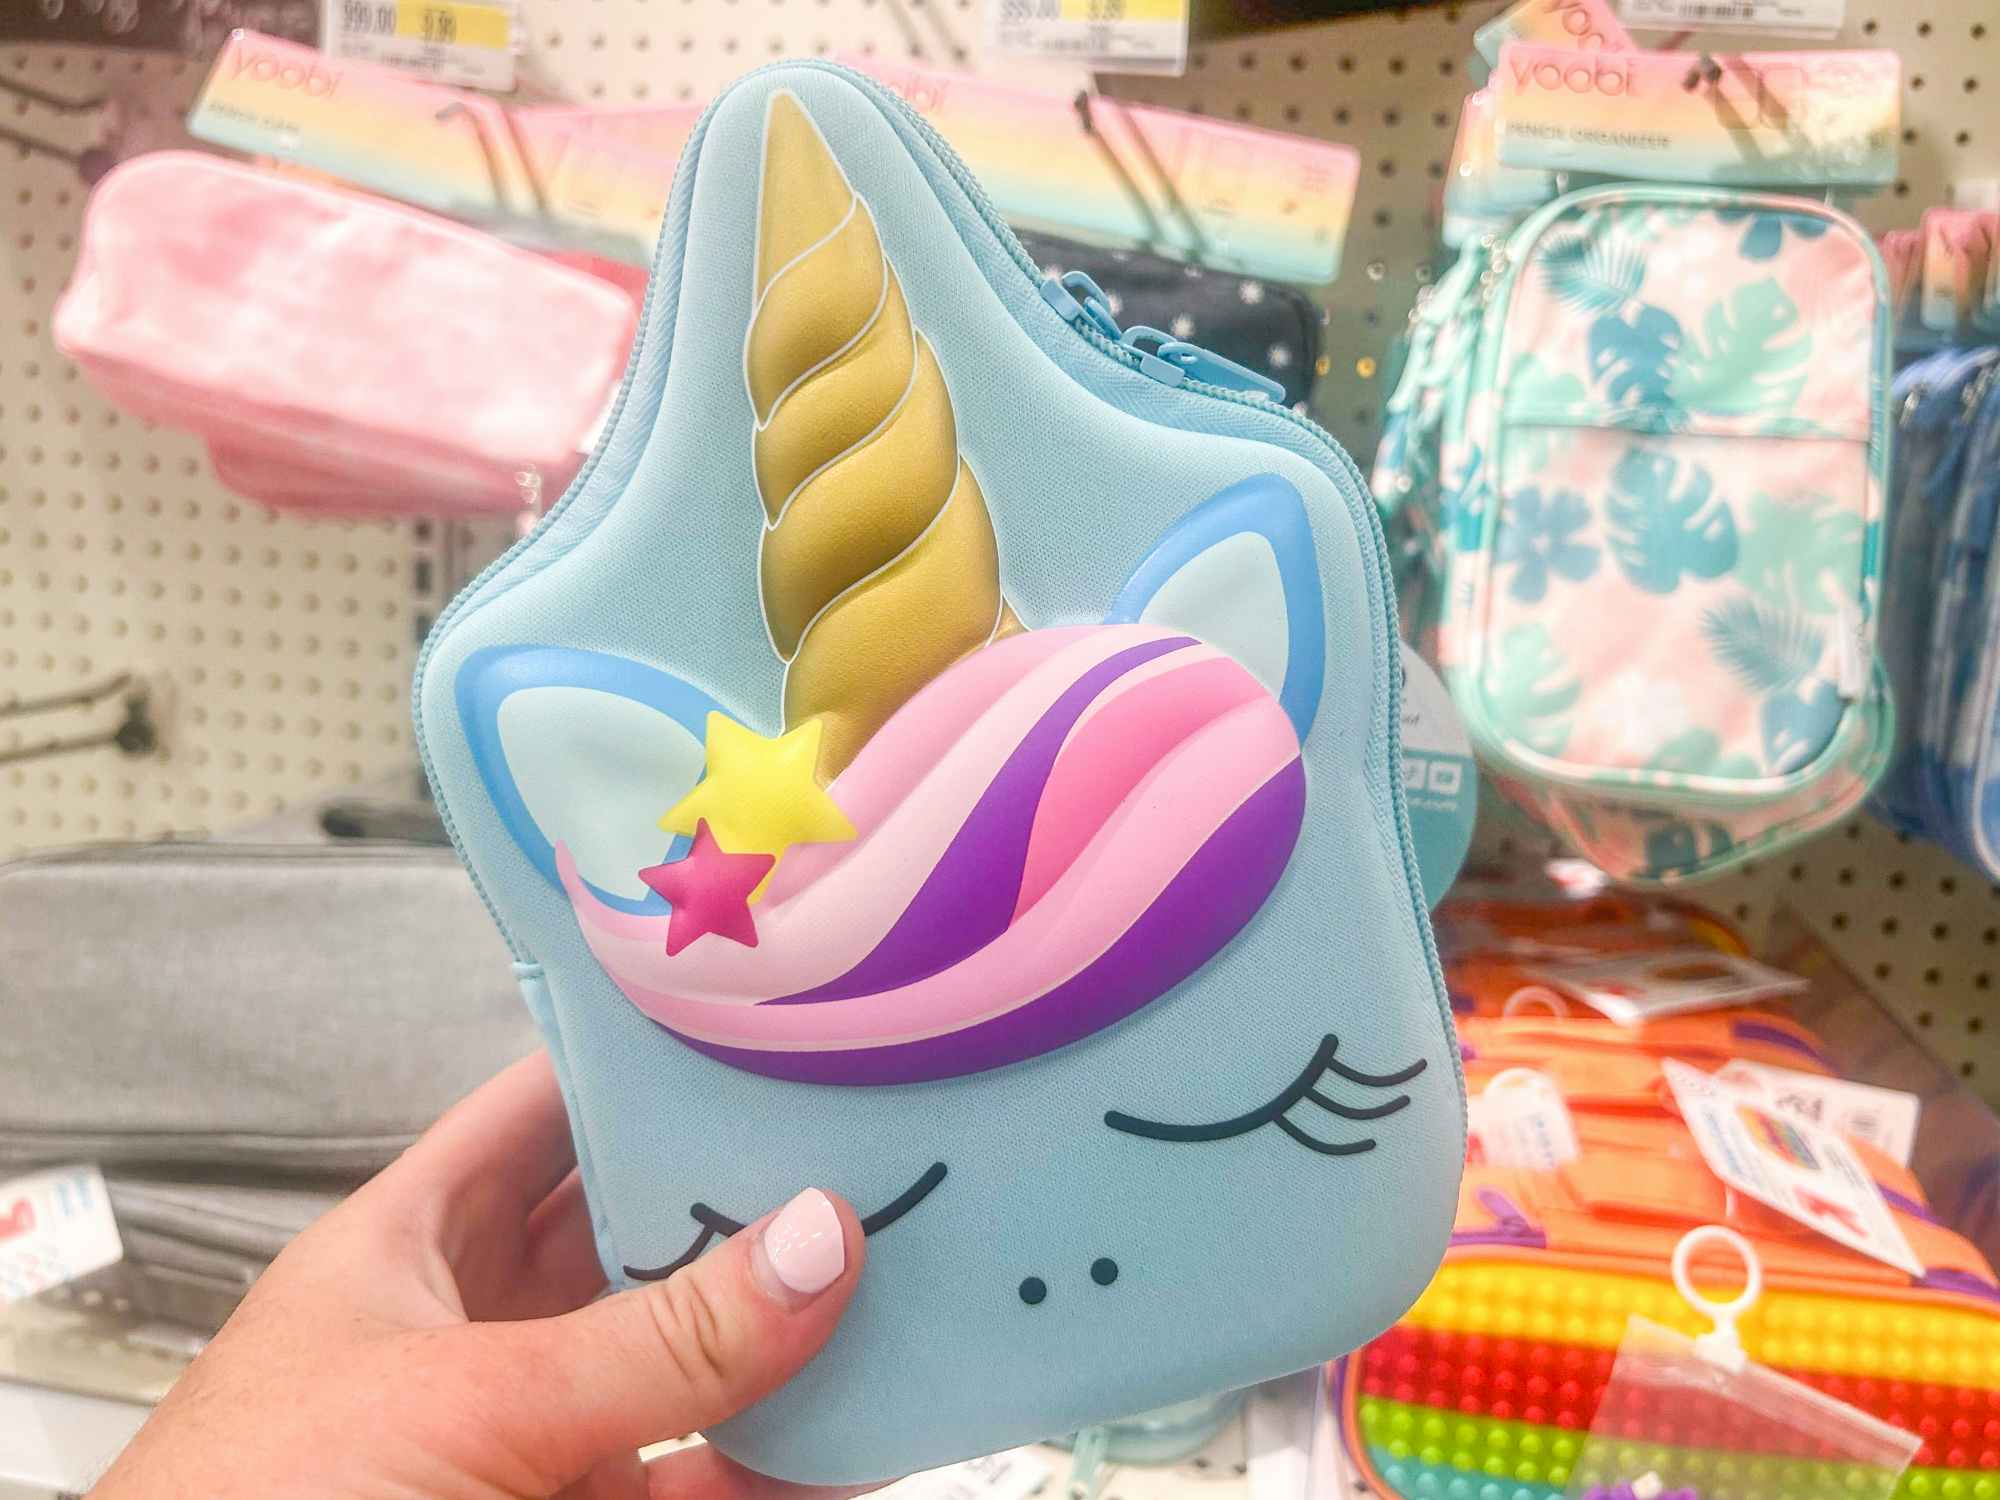 Someone holding up a Unicorn pencil case at Target